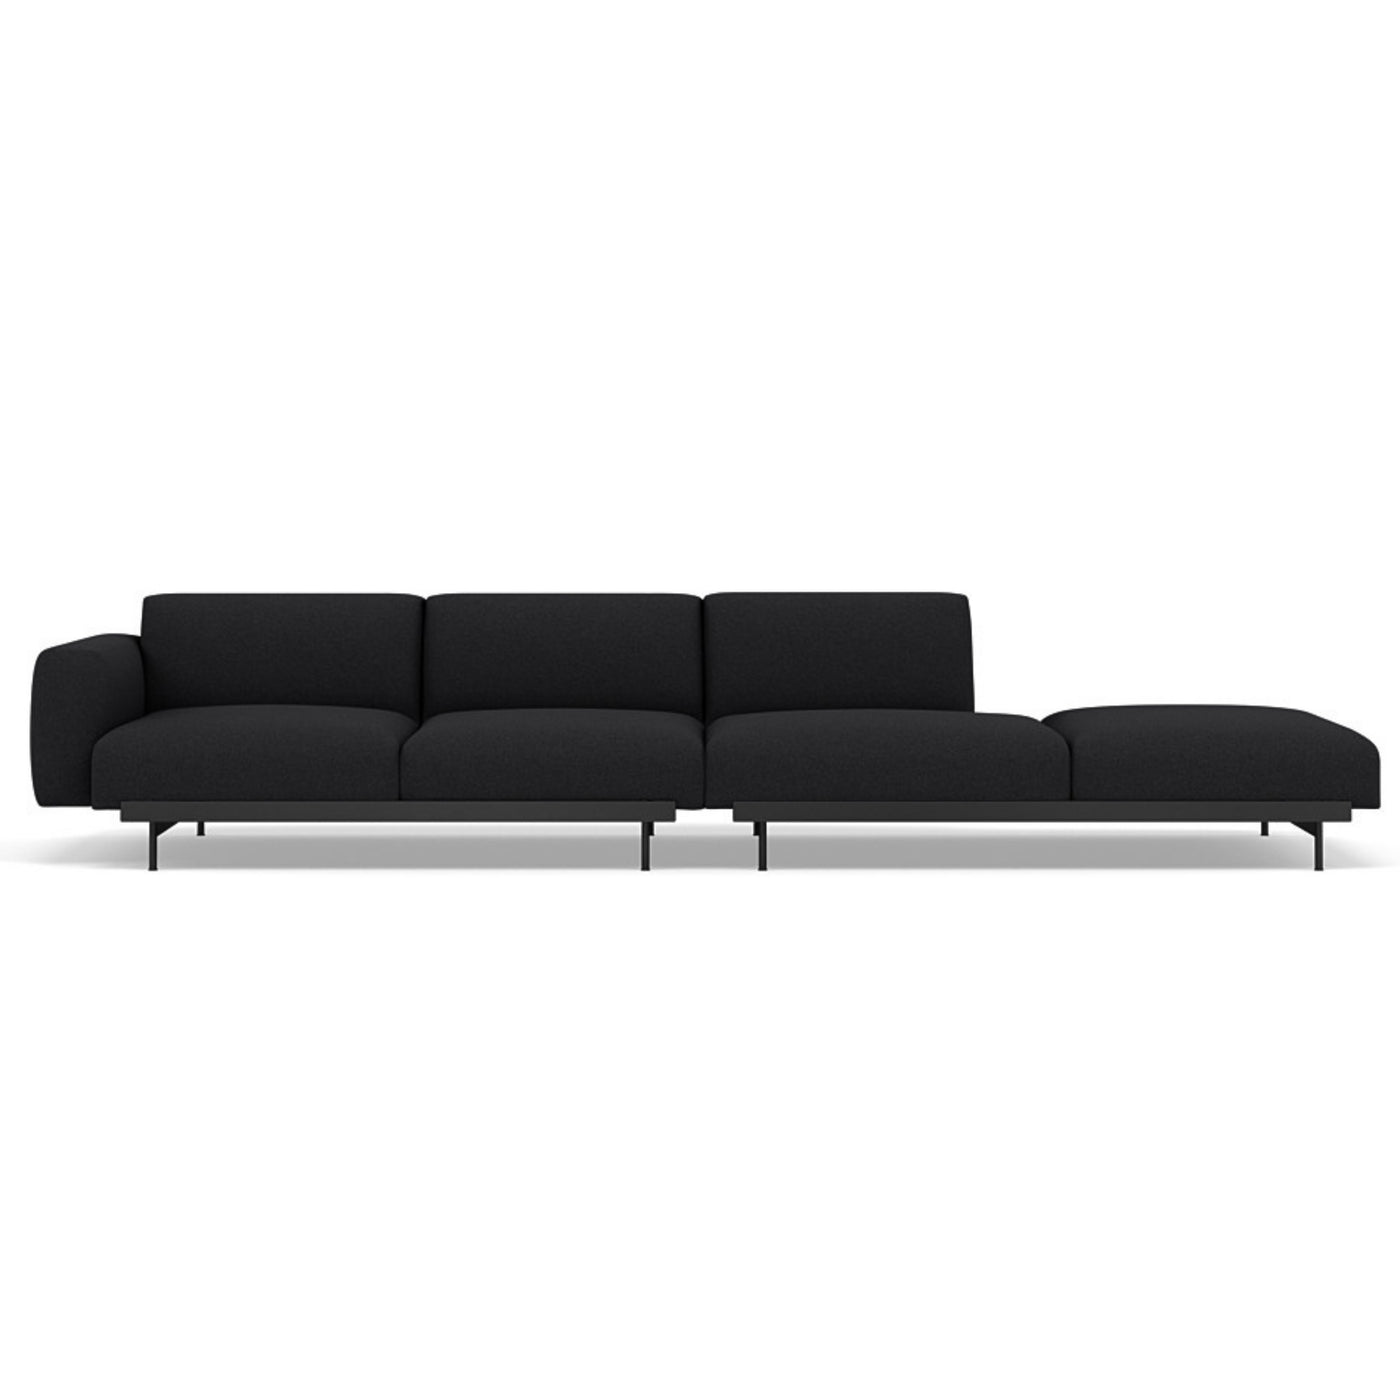 Muuto In Situ Modular 4 Seater Sofa configuration 2. Made to order from someday designs. #colour_divina-md-193